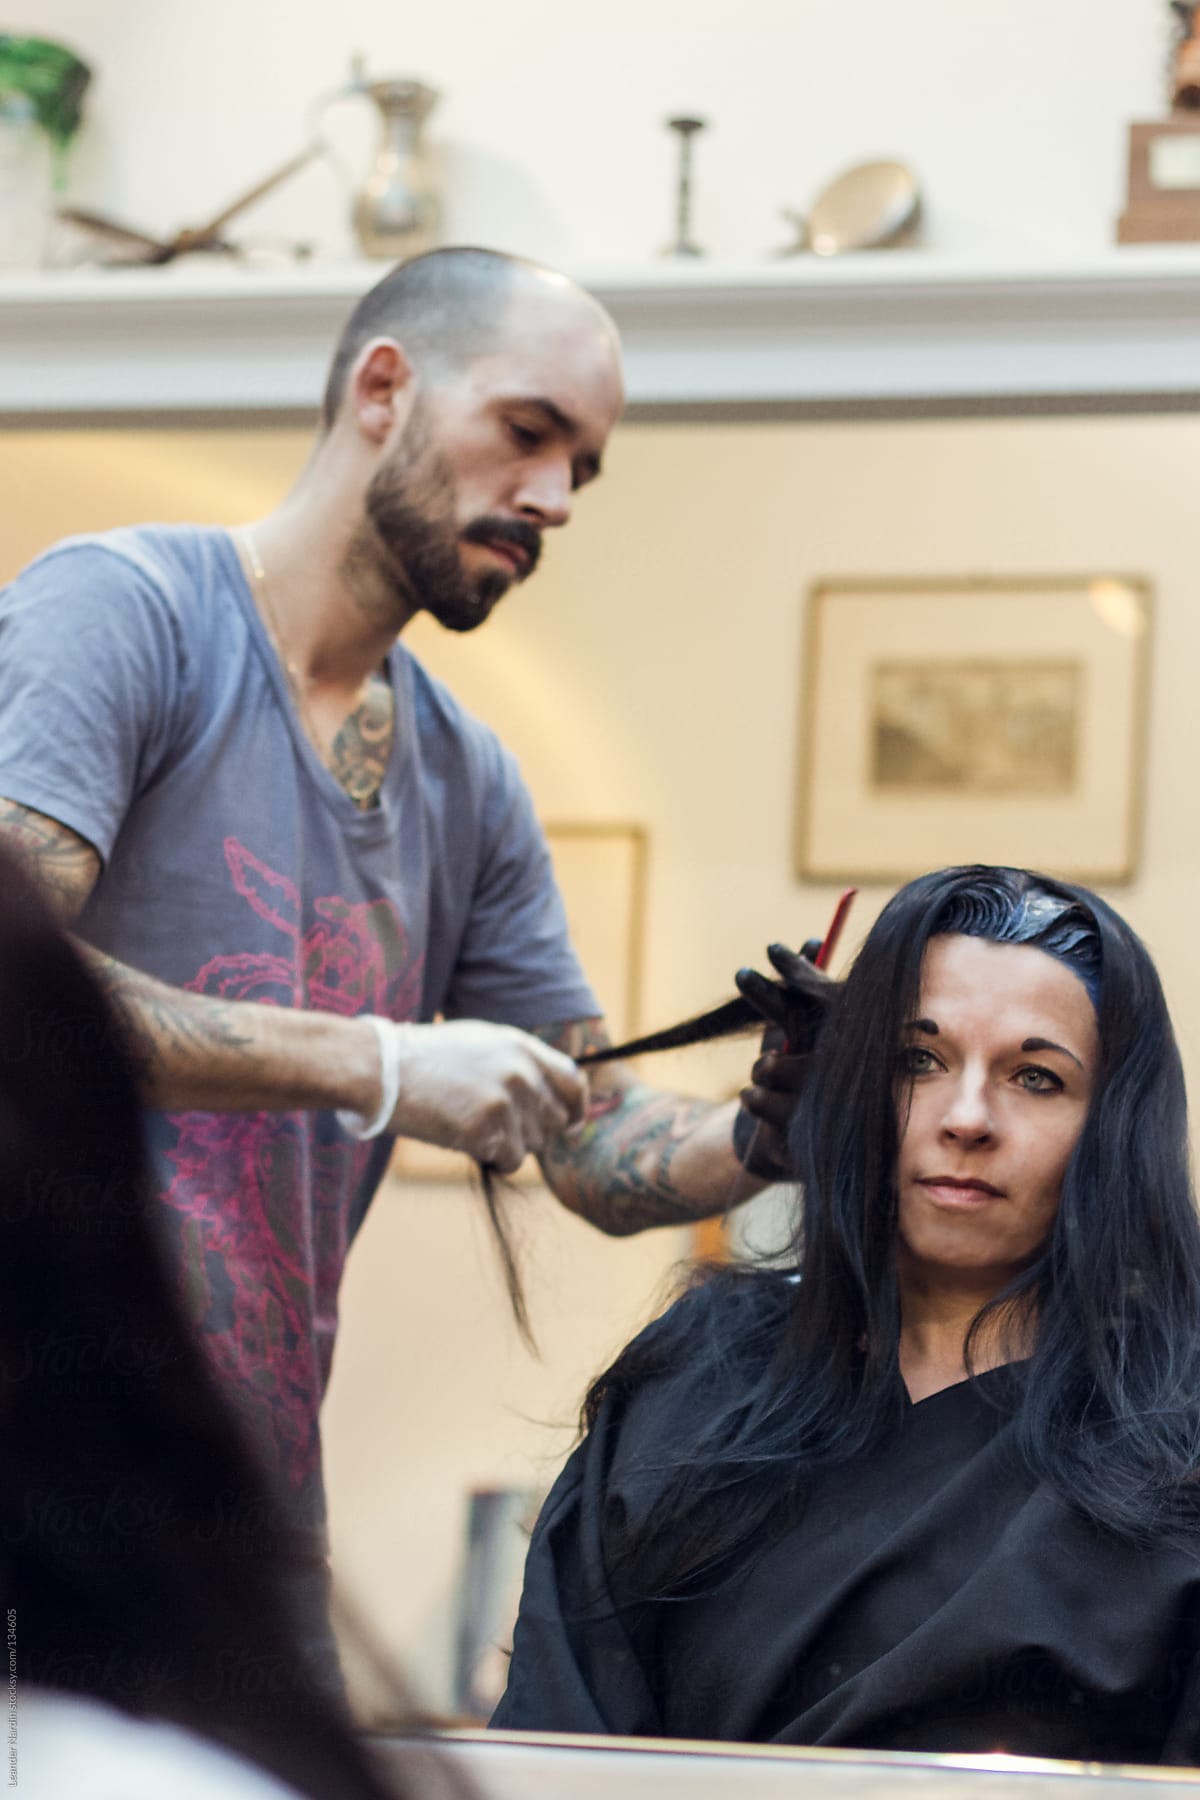 Woman is getting her hair colored by a  tattooed hairdresser